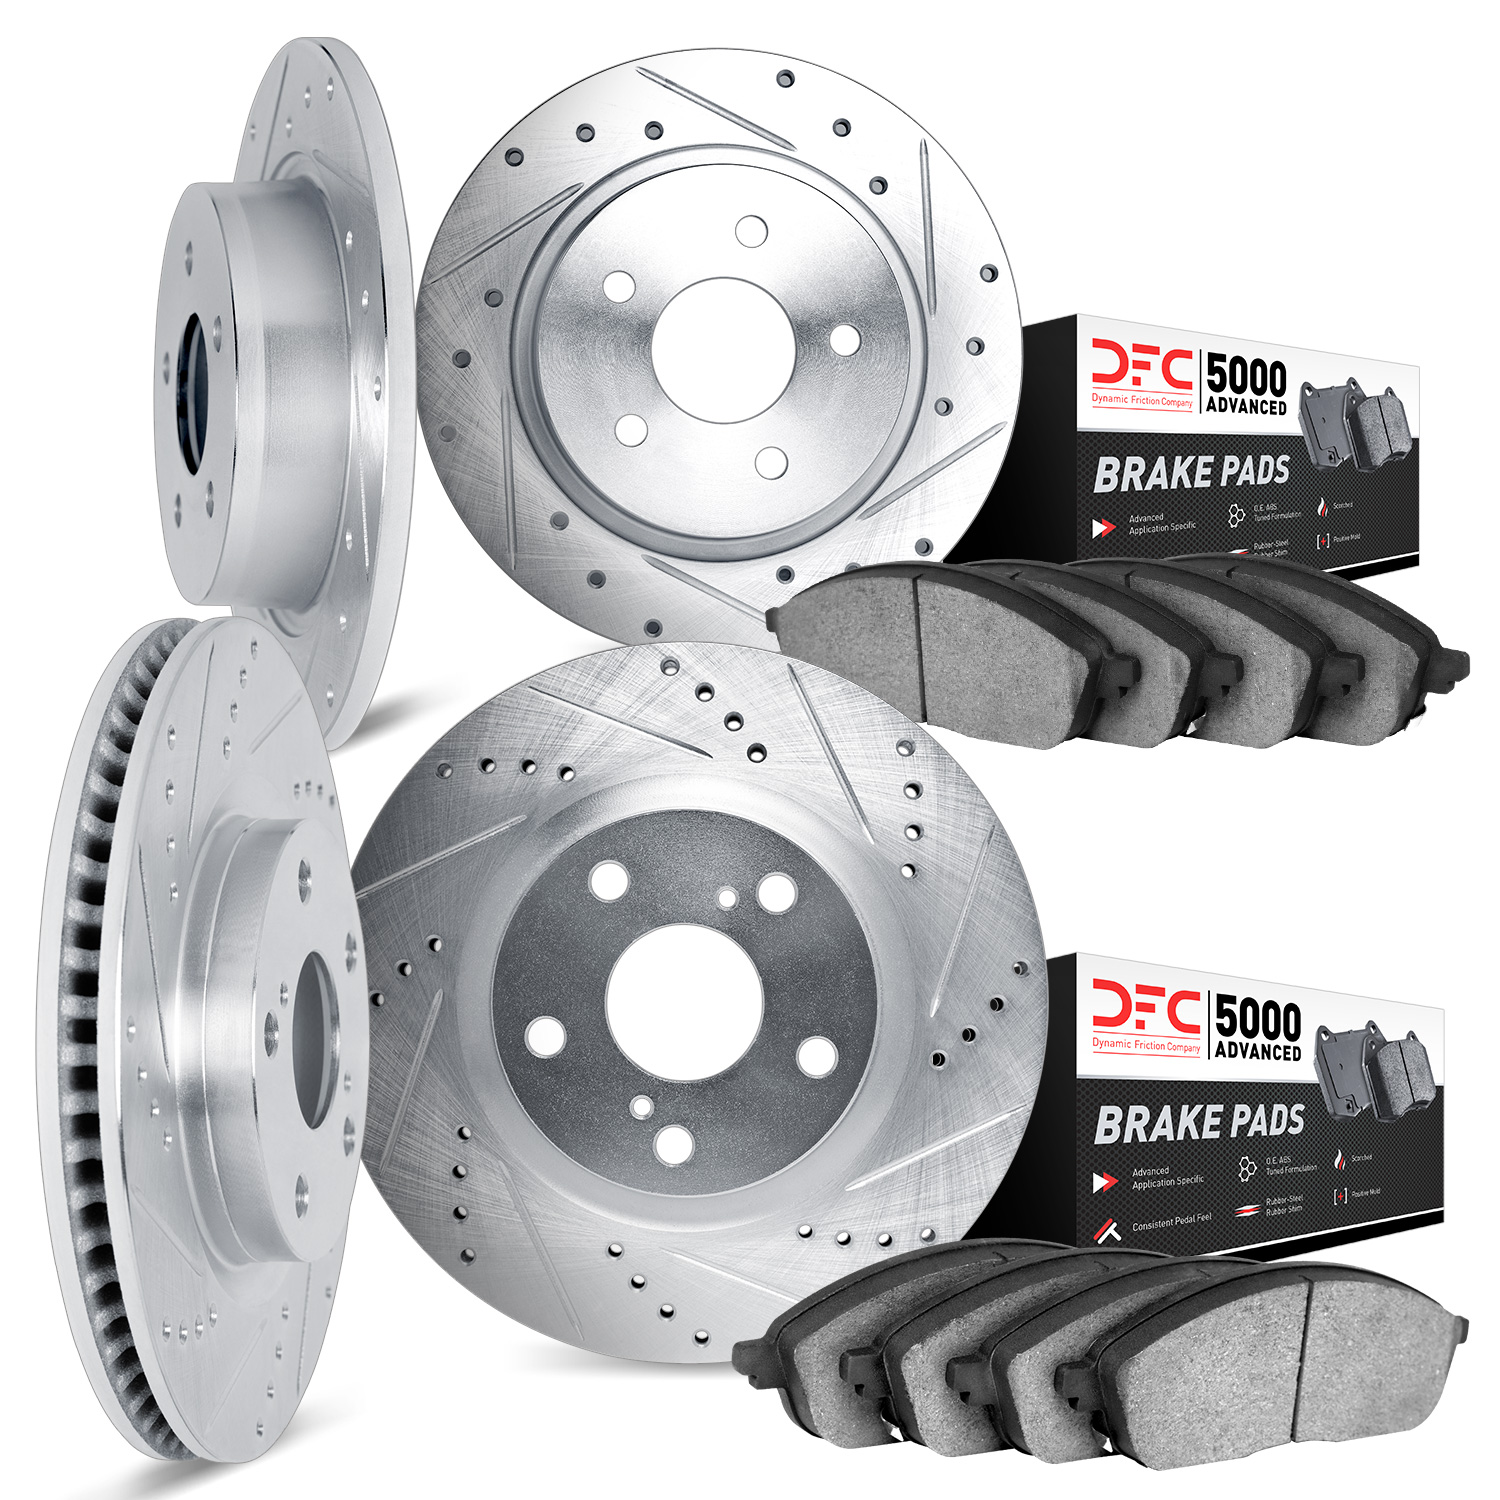 7504-72054 Drilled/Slotted Brake Rotors w/5000 Advanced Brake Pads Kit [Silver], 2004-2011 Mitsubishi, Position: Front and Rear